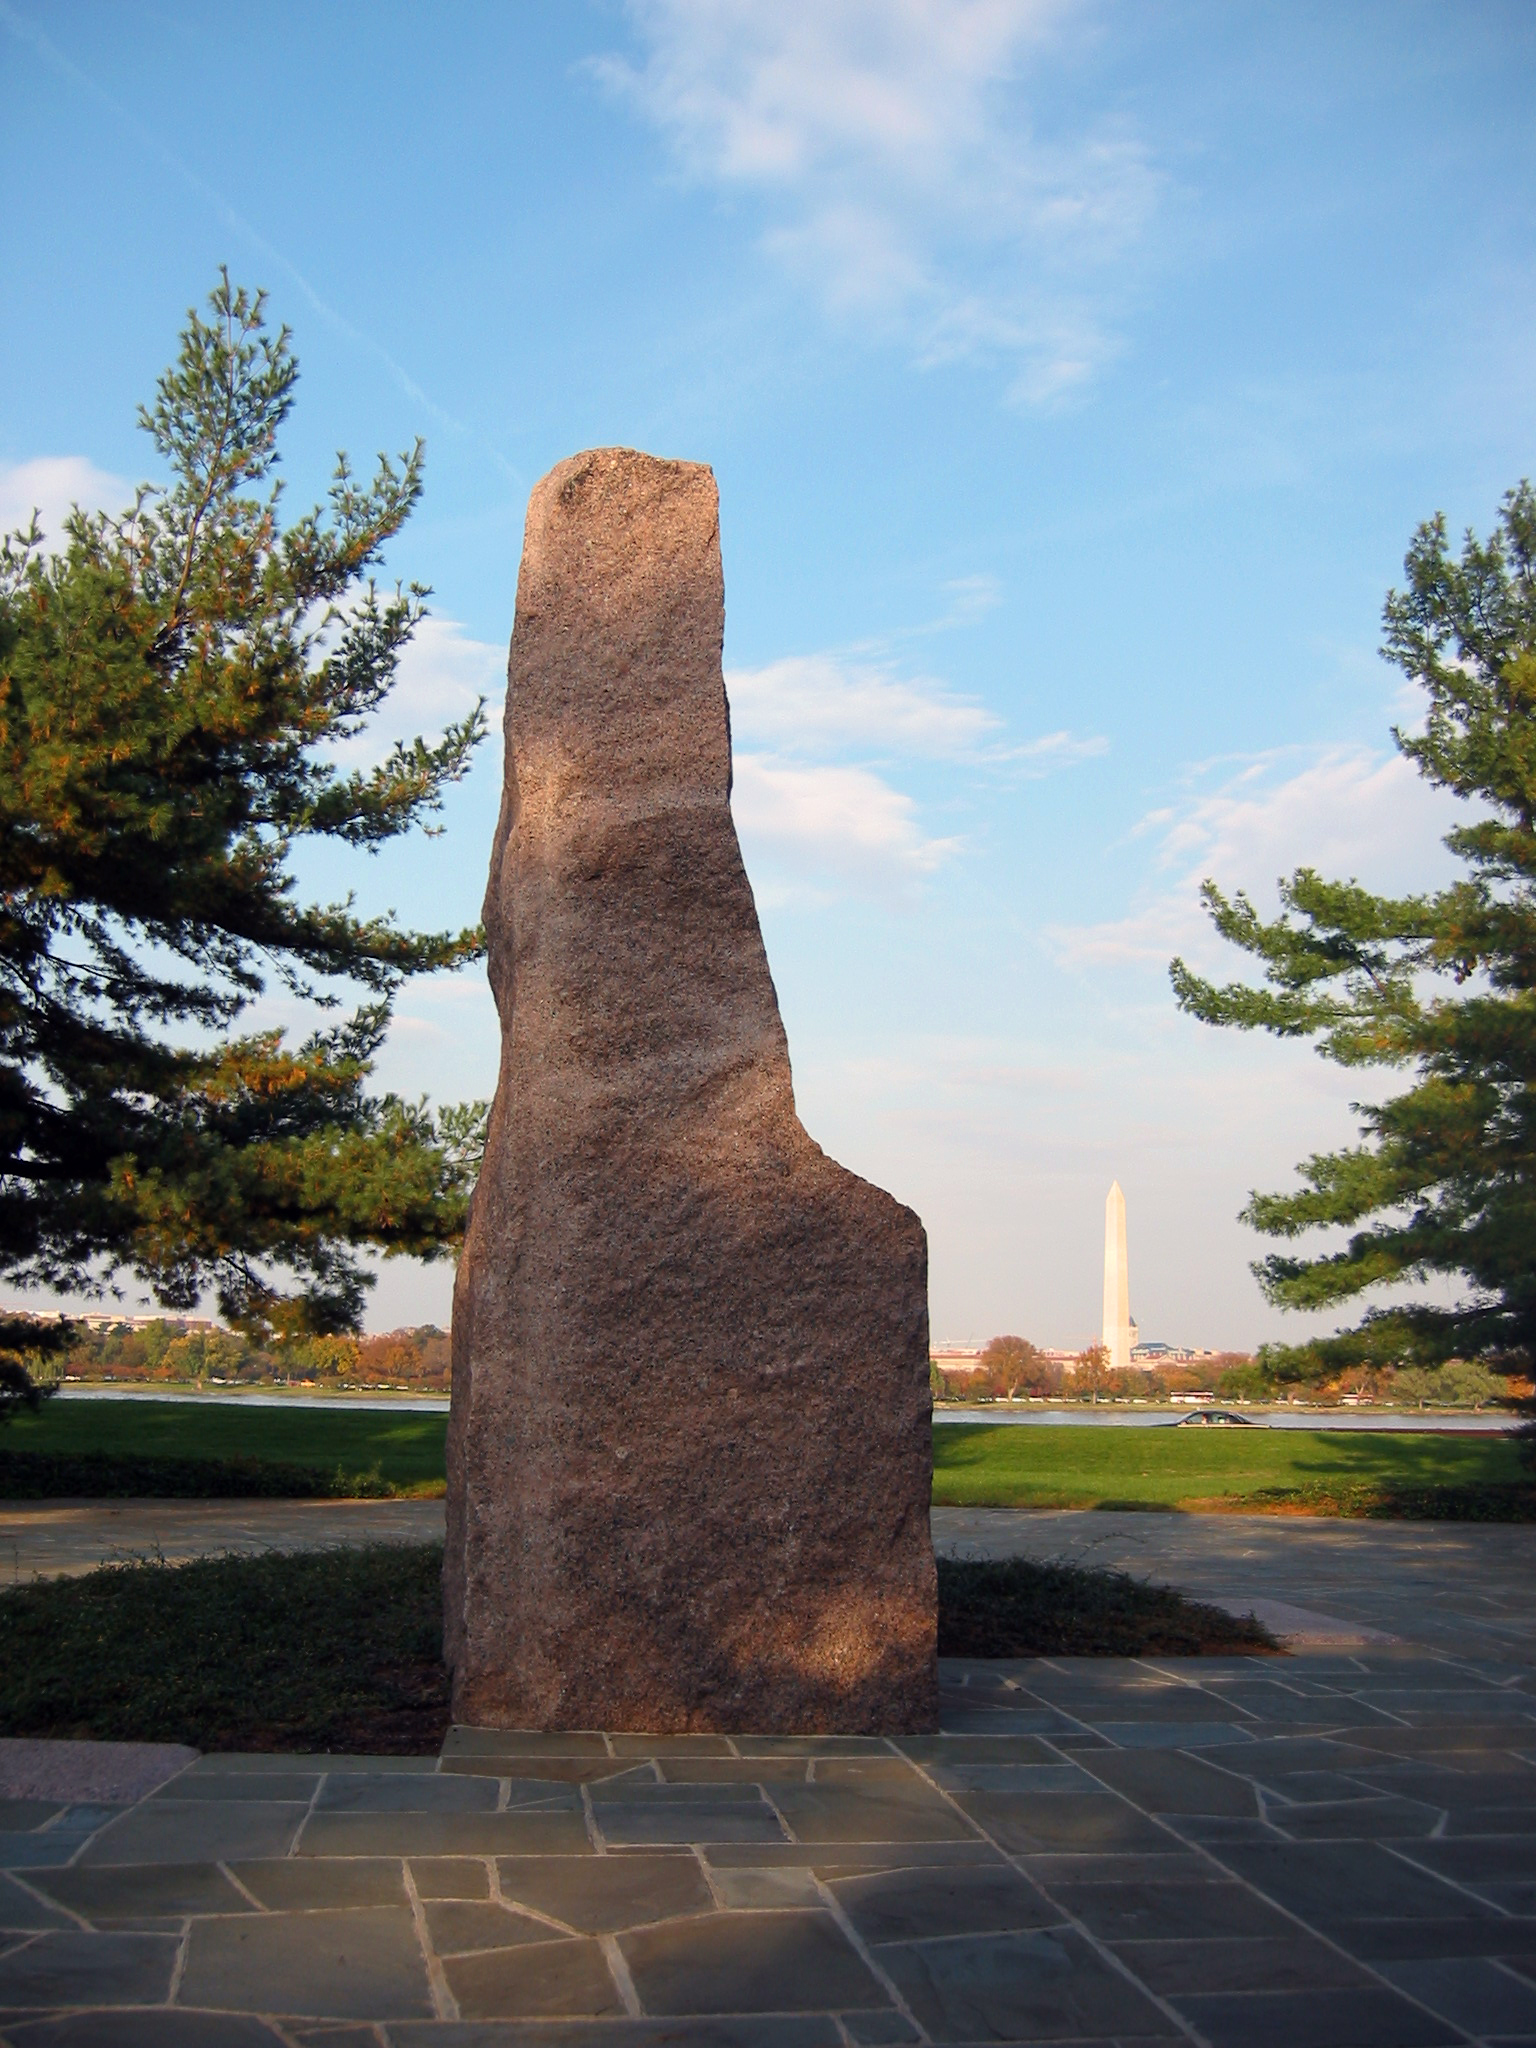 The granite monolith at the Lyndon Baines Johnson Memorial Grove on the Potomac, created by Harold Vogel.